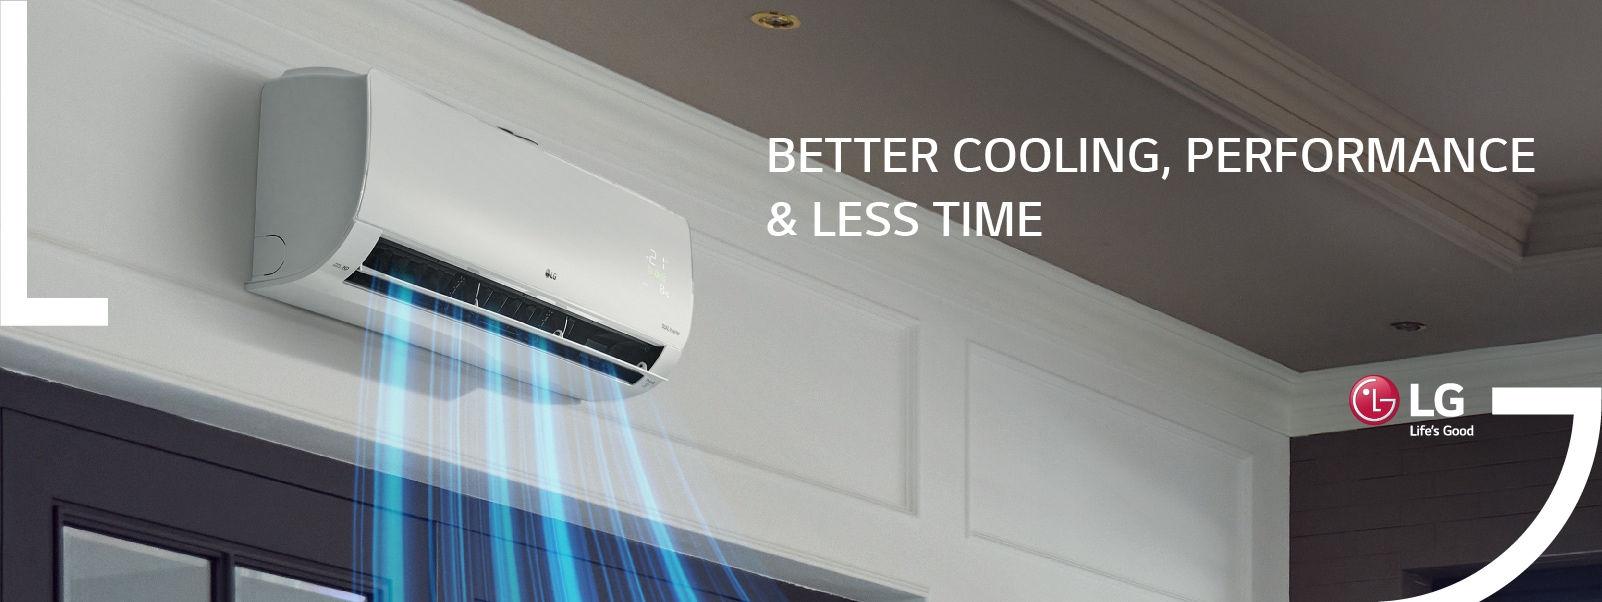 LG Air Conditioning Units Find Powerful AC LG Levant